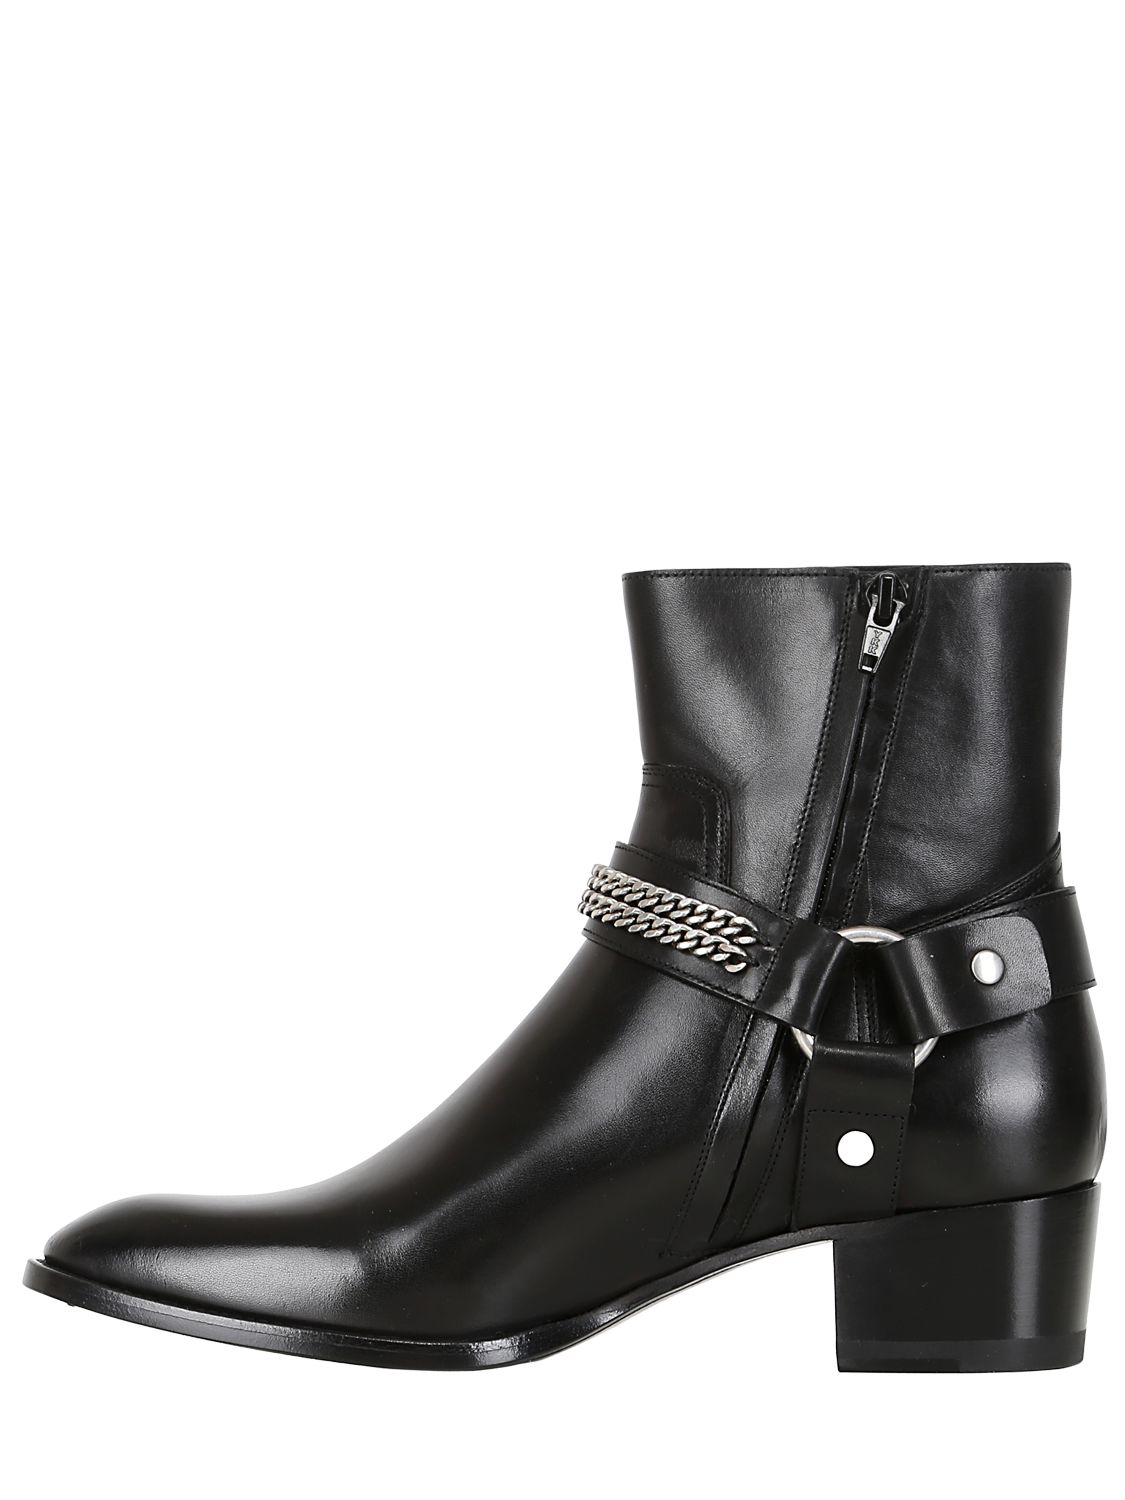 Lyst - Saint Laurent 40mm Wyatt Leather Chained Boots in Black